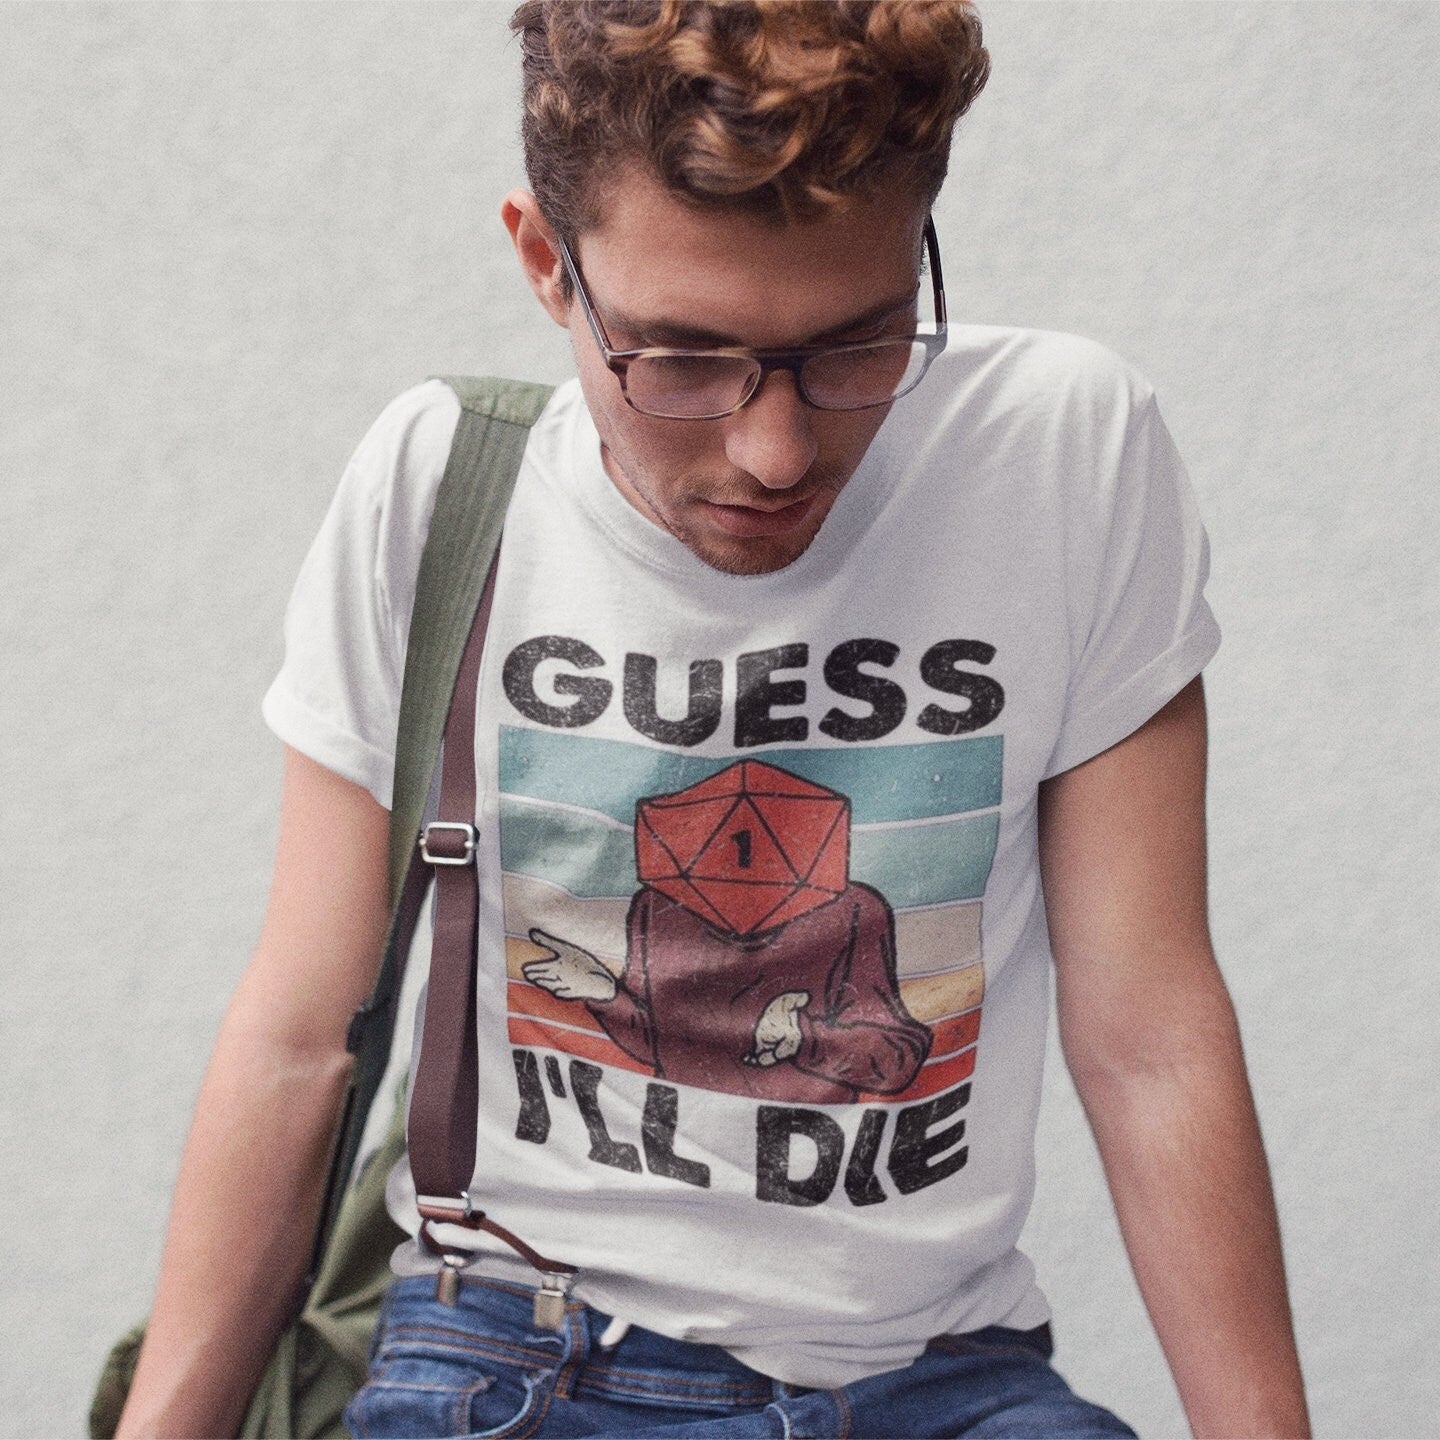 Guess Ill Die T Shirt | DnD T Shirt | Dungeons And Dragons | Board Games T Shirt